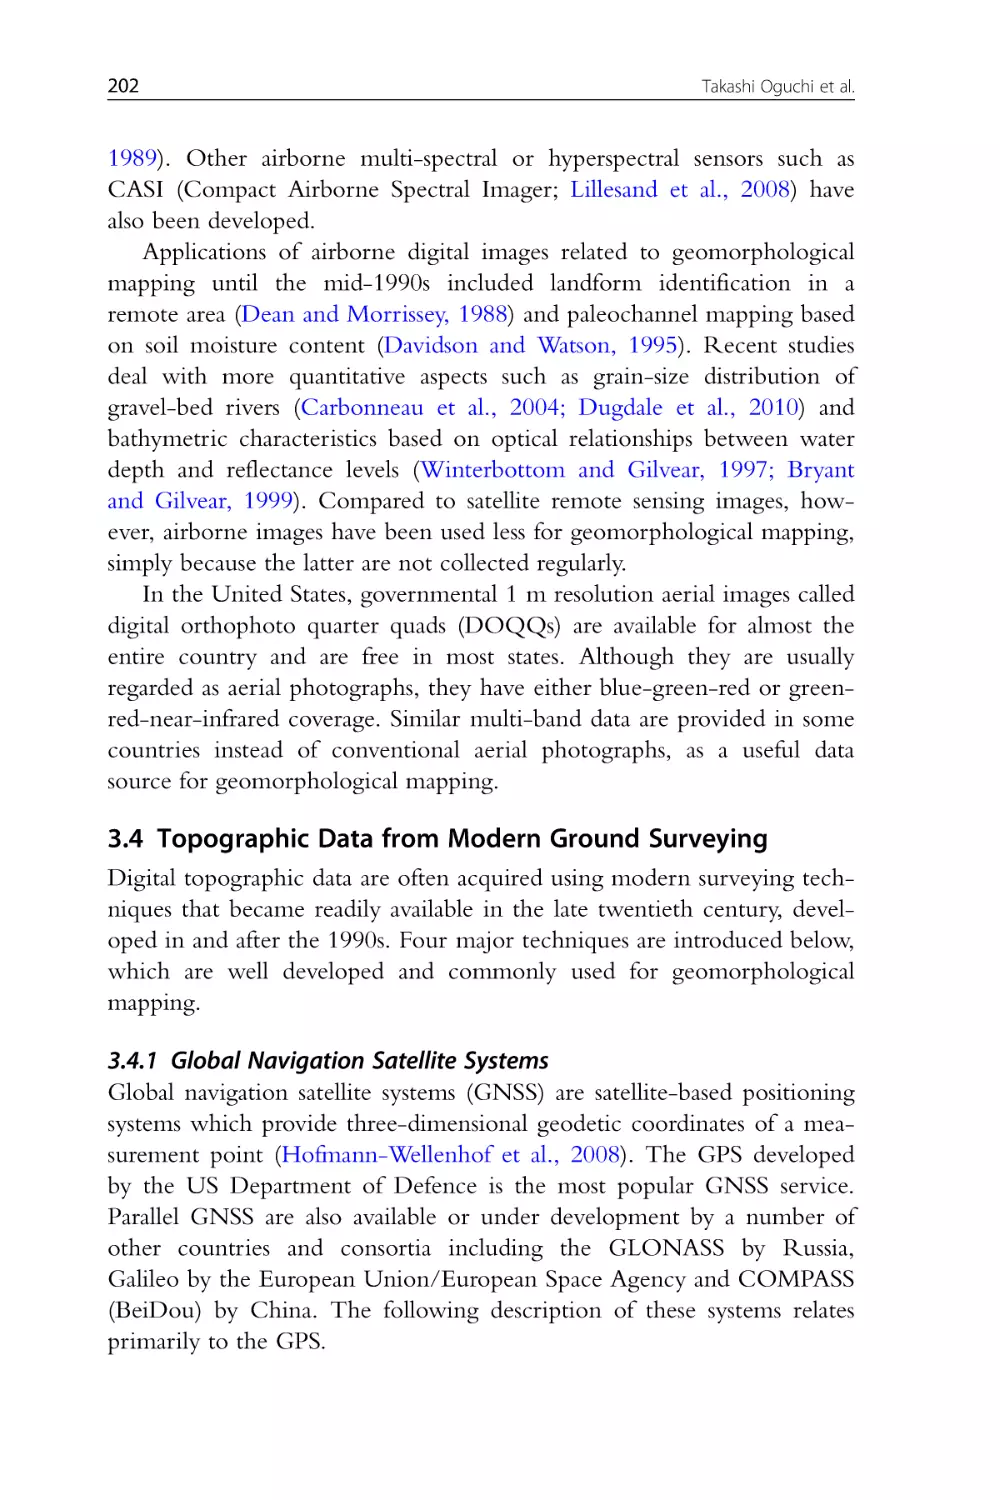 3.4 Topographic Data from Modern Ground Surveying
3.4.1 Global Navigation Satellite Systems